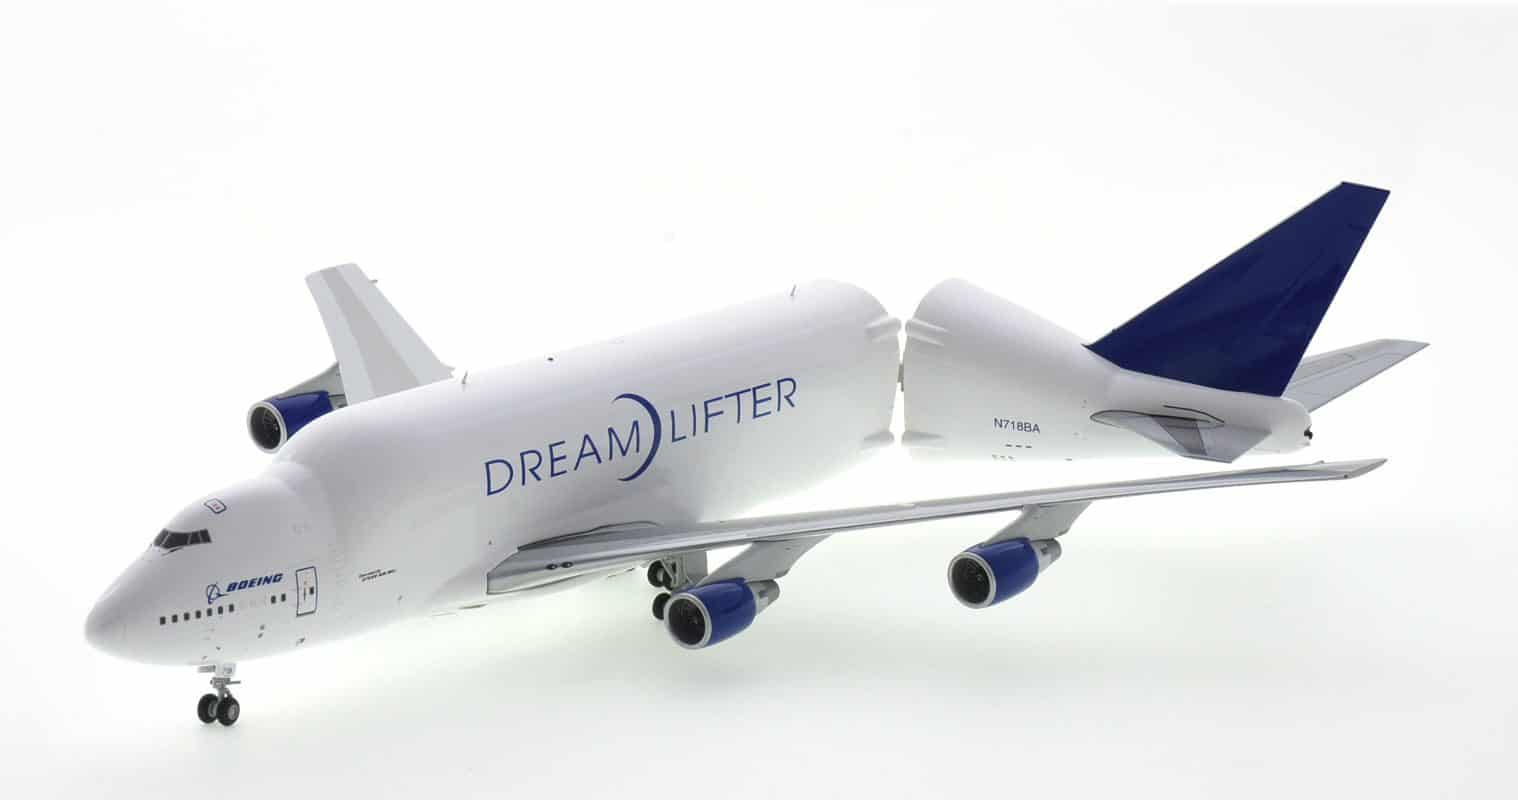 Front port side view with tail open, Gemini Jets G2BOE1003 - 1/200 scale diecast model of the Boeing 747-47LCF Dreamlifter with opening fuselage, registration N718BA, in Boeing livery